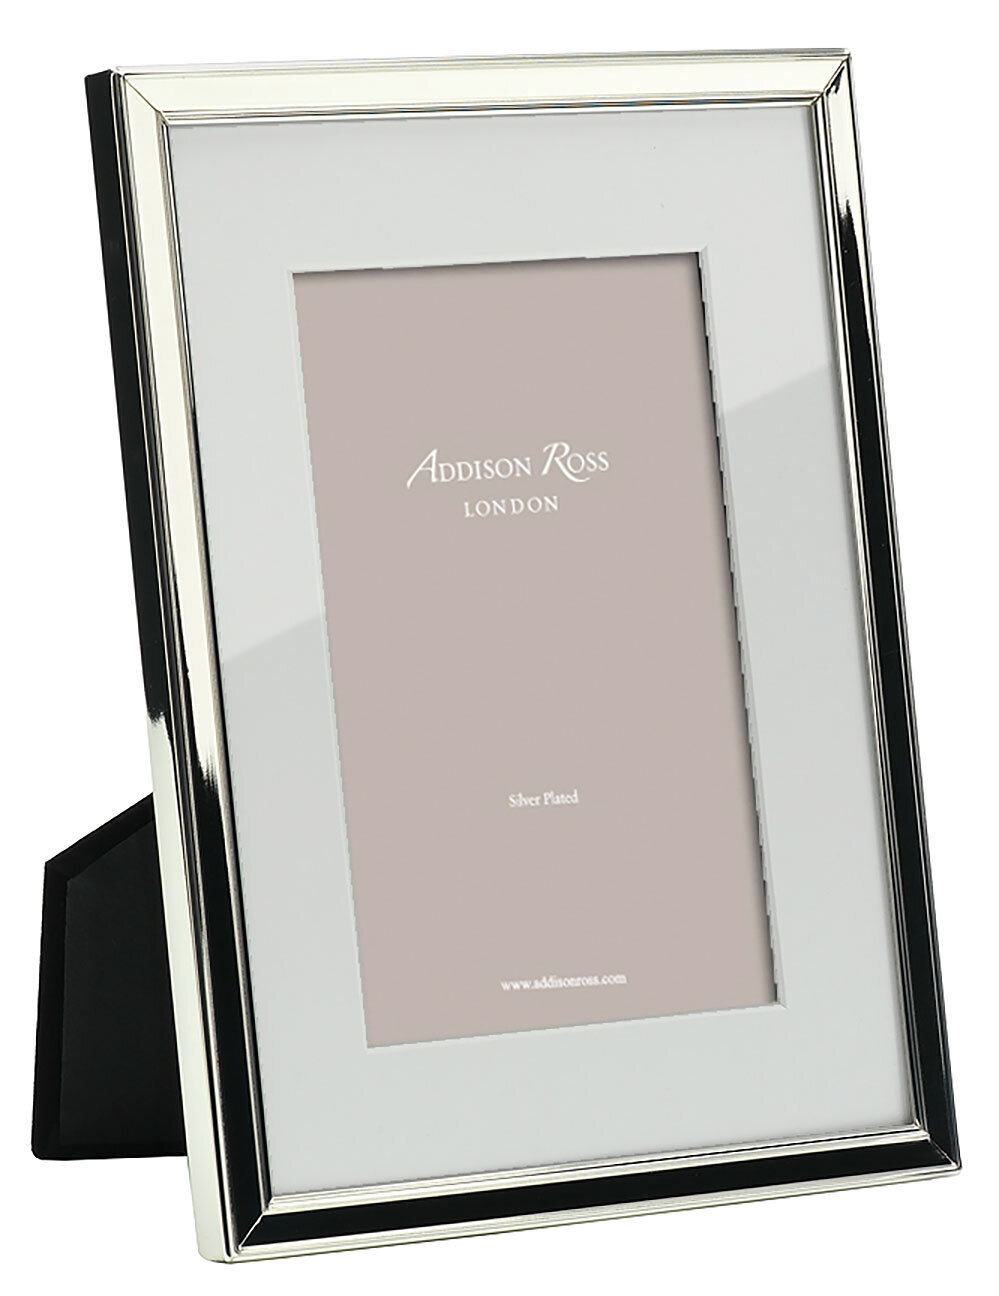 Addison Ross Photo Frame White Mount 7 x 9 Inch Silver-plated FR0614